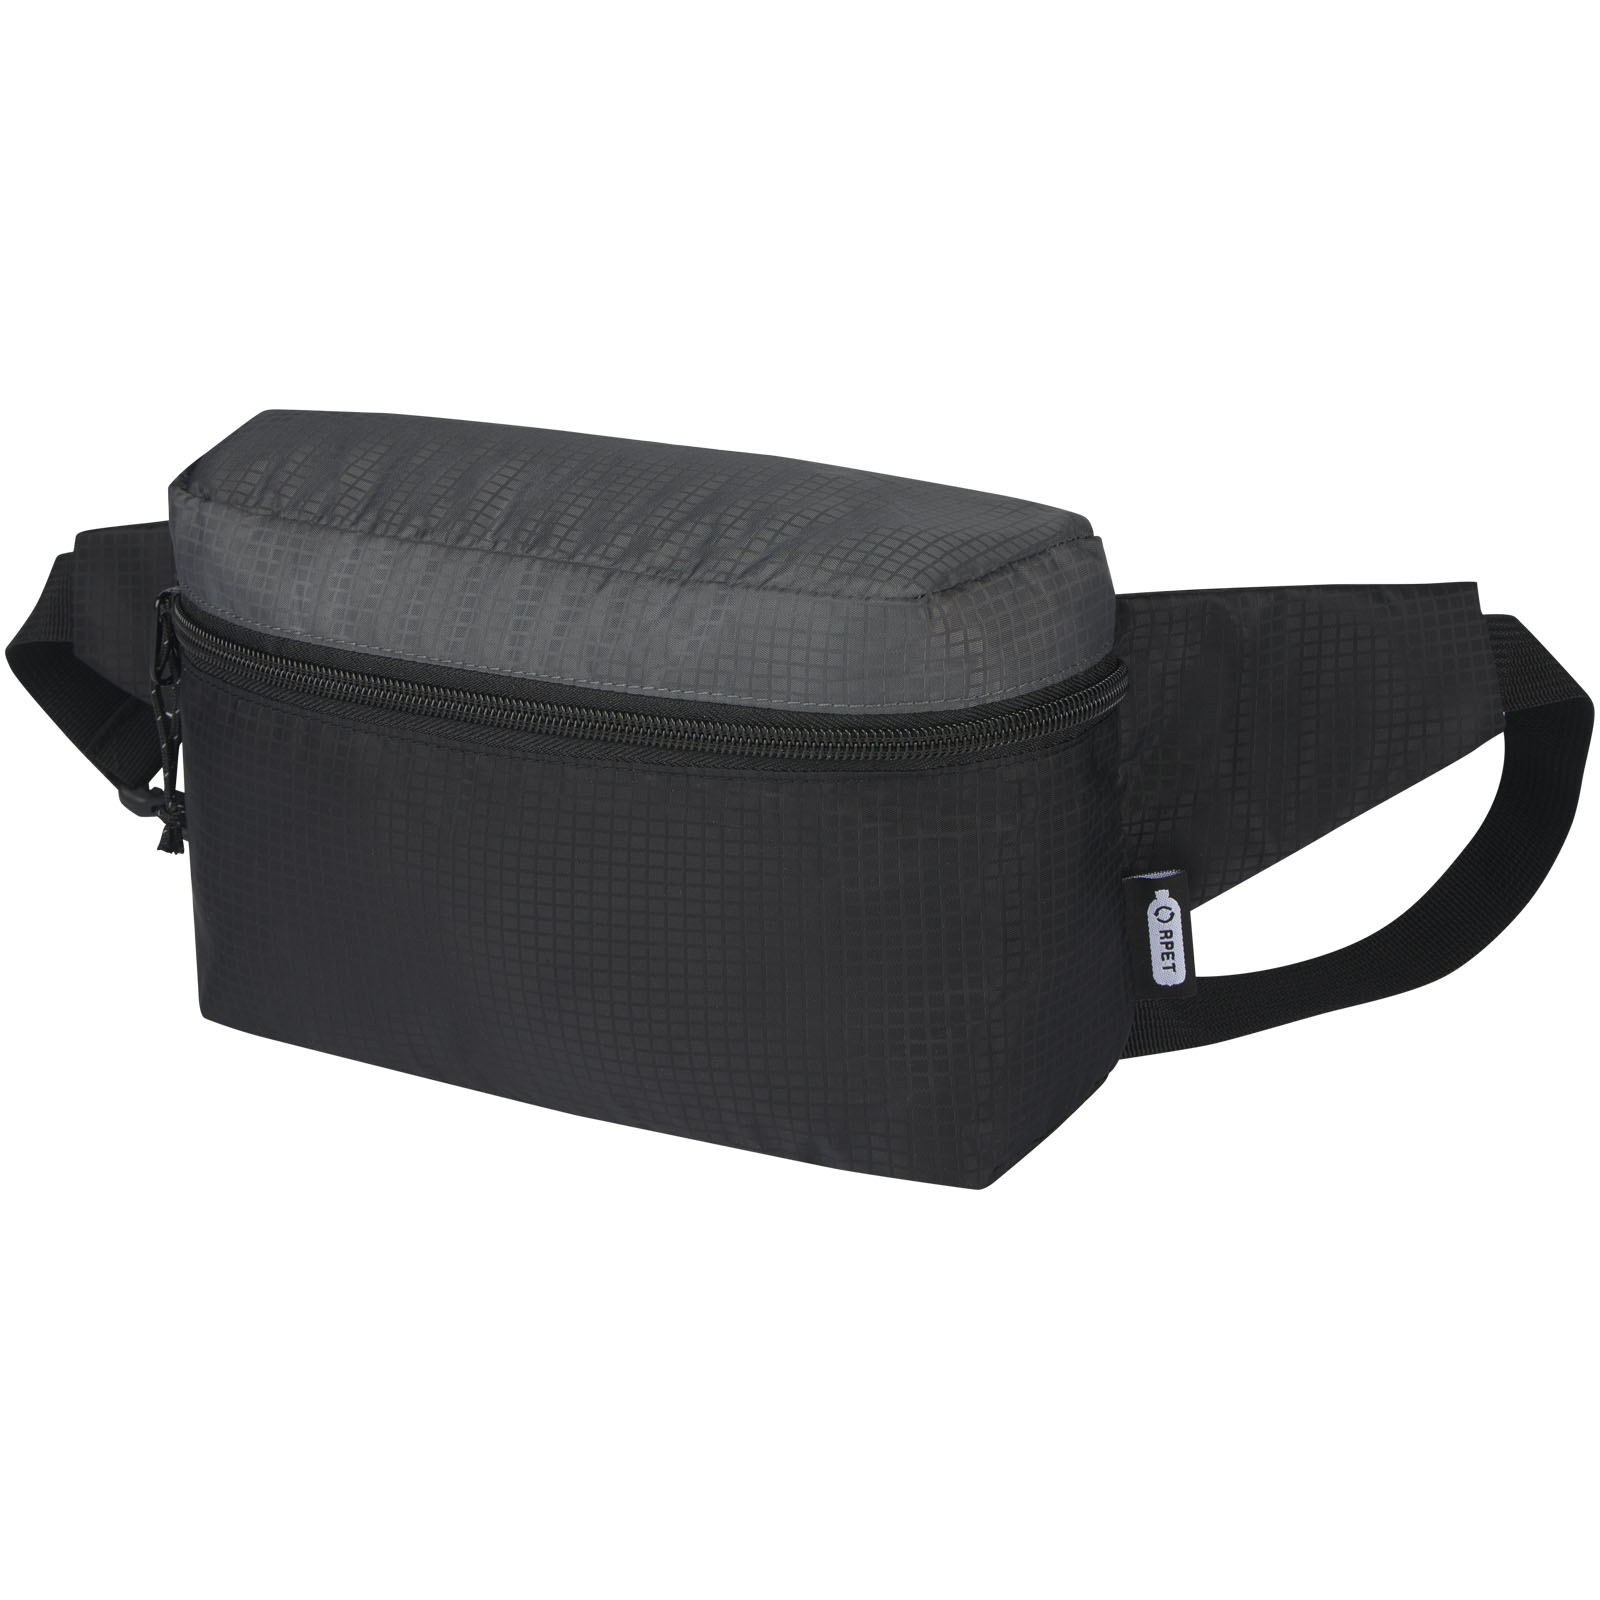 Advertising Travel Accessories - Trailhead GRS recycled lightweight fanny pack 2.5L